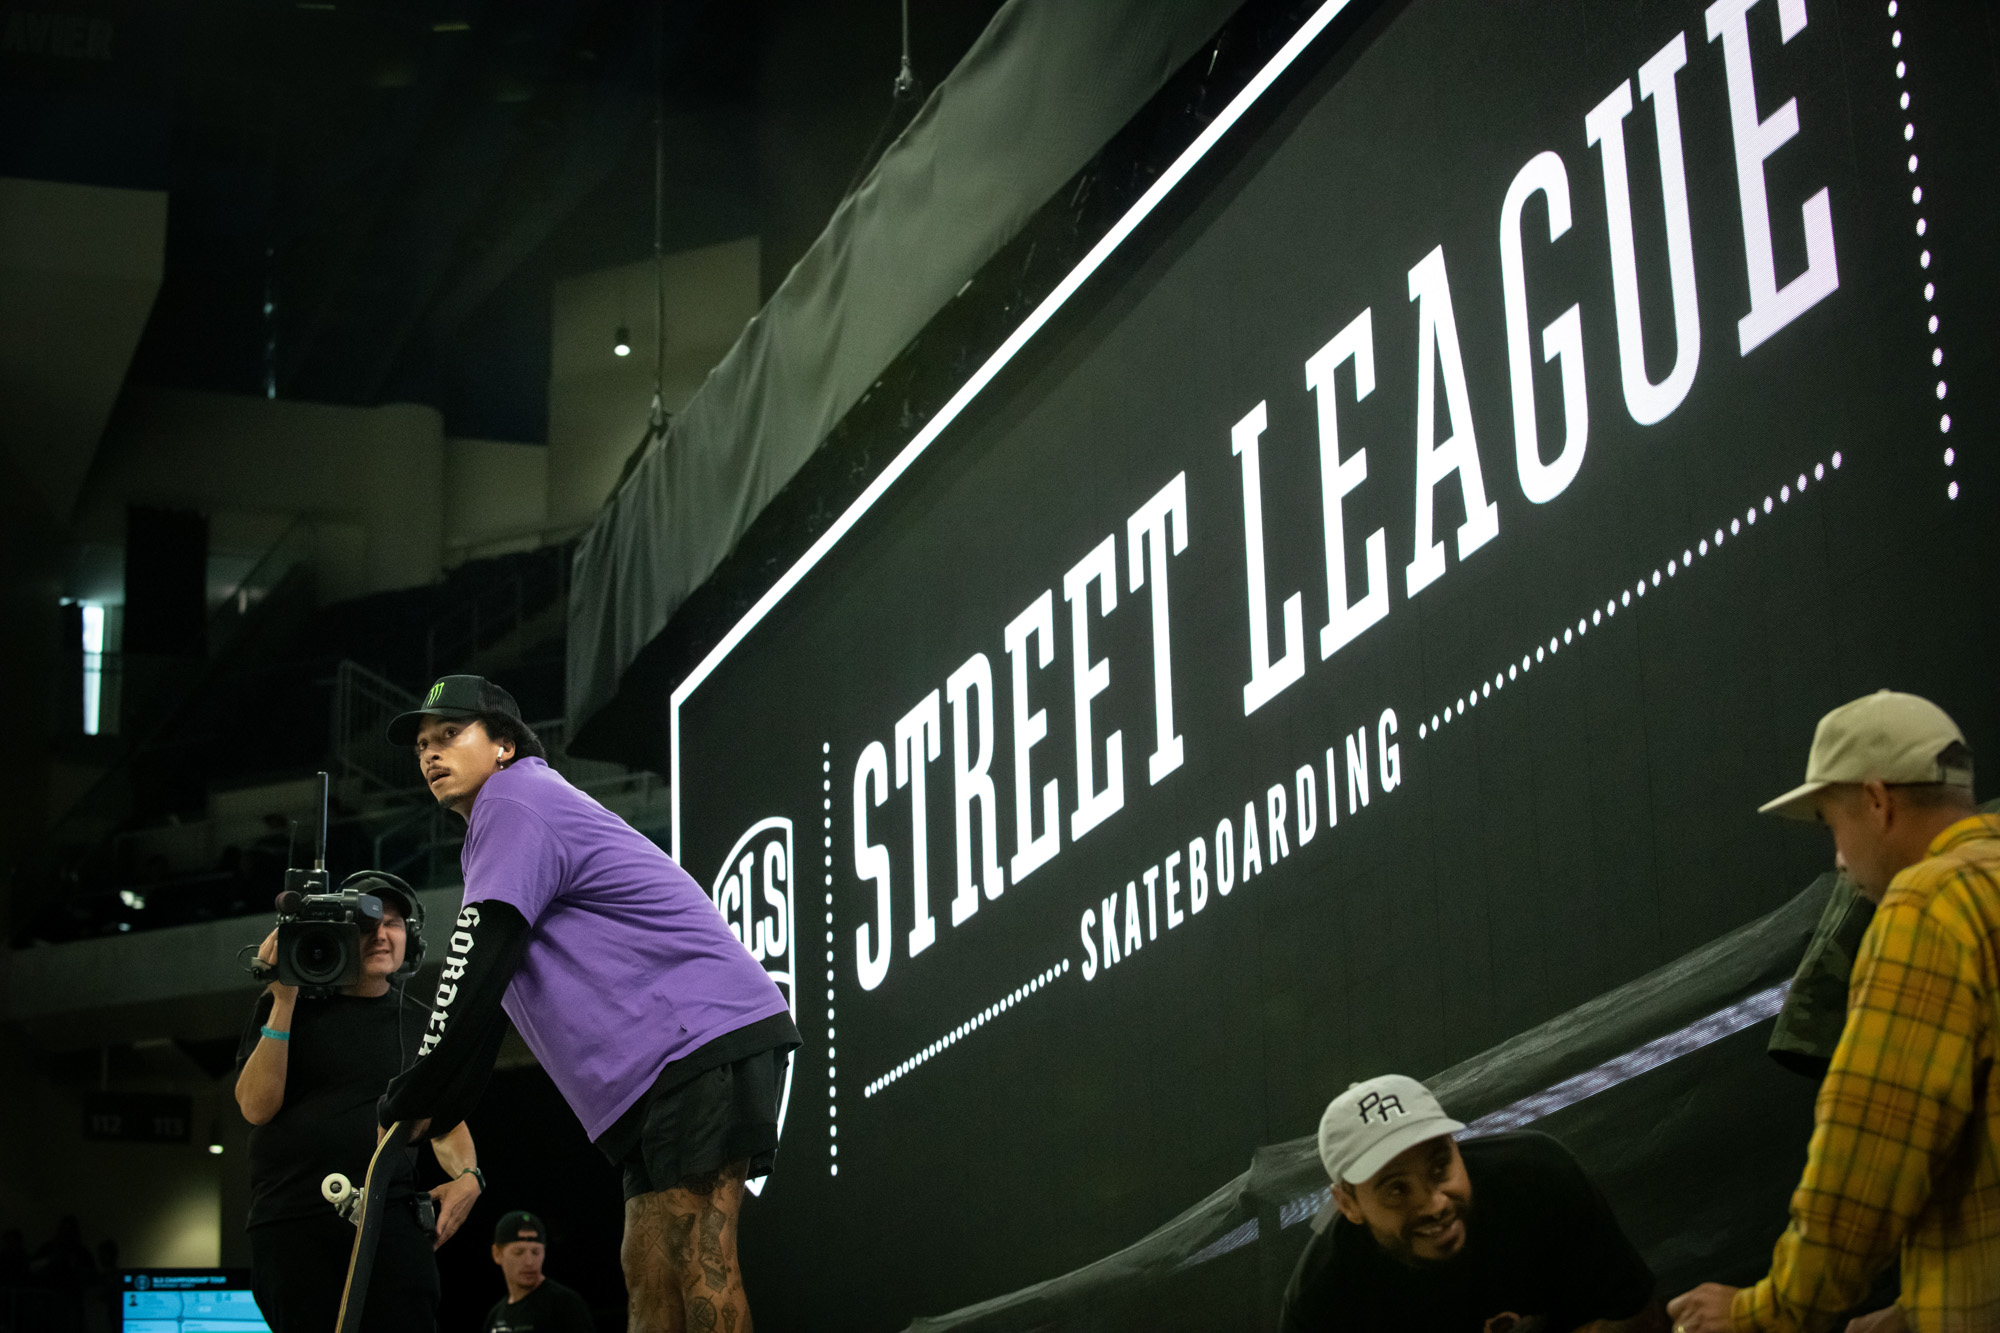 Monster Energy’s Nyjah Huston Takes Third Place at SLS Chicago 2023 Street Skateboarding Competition